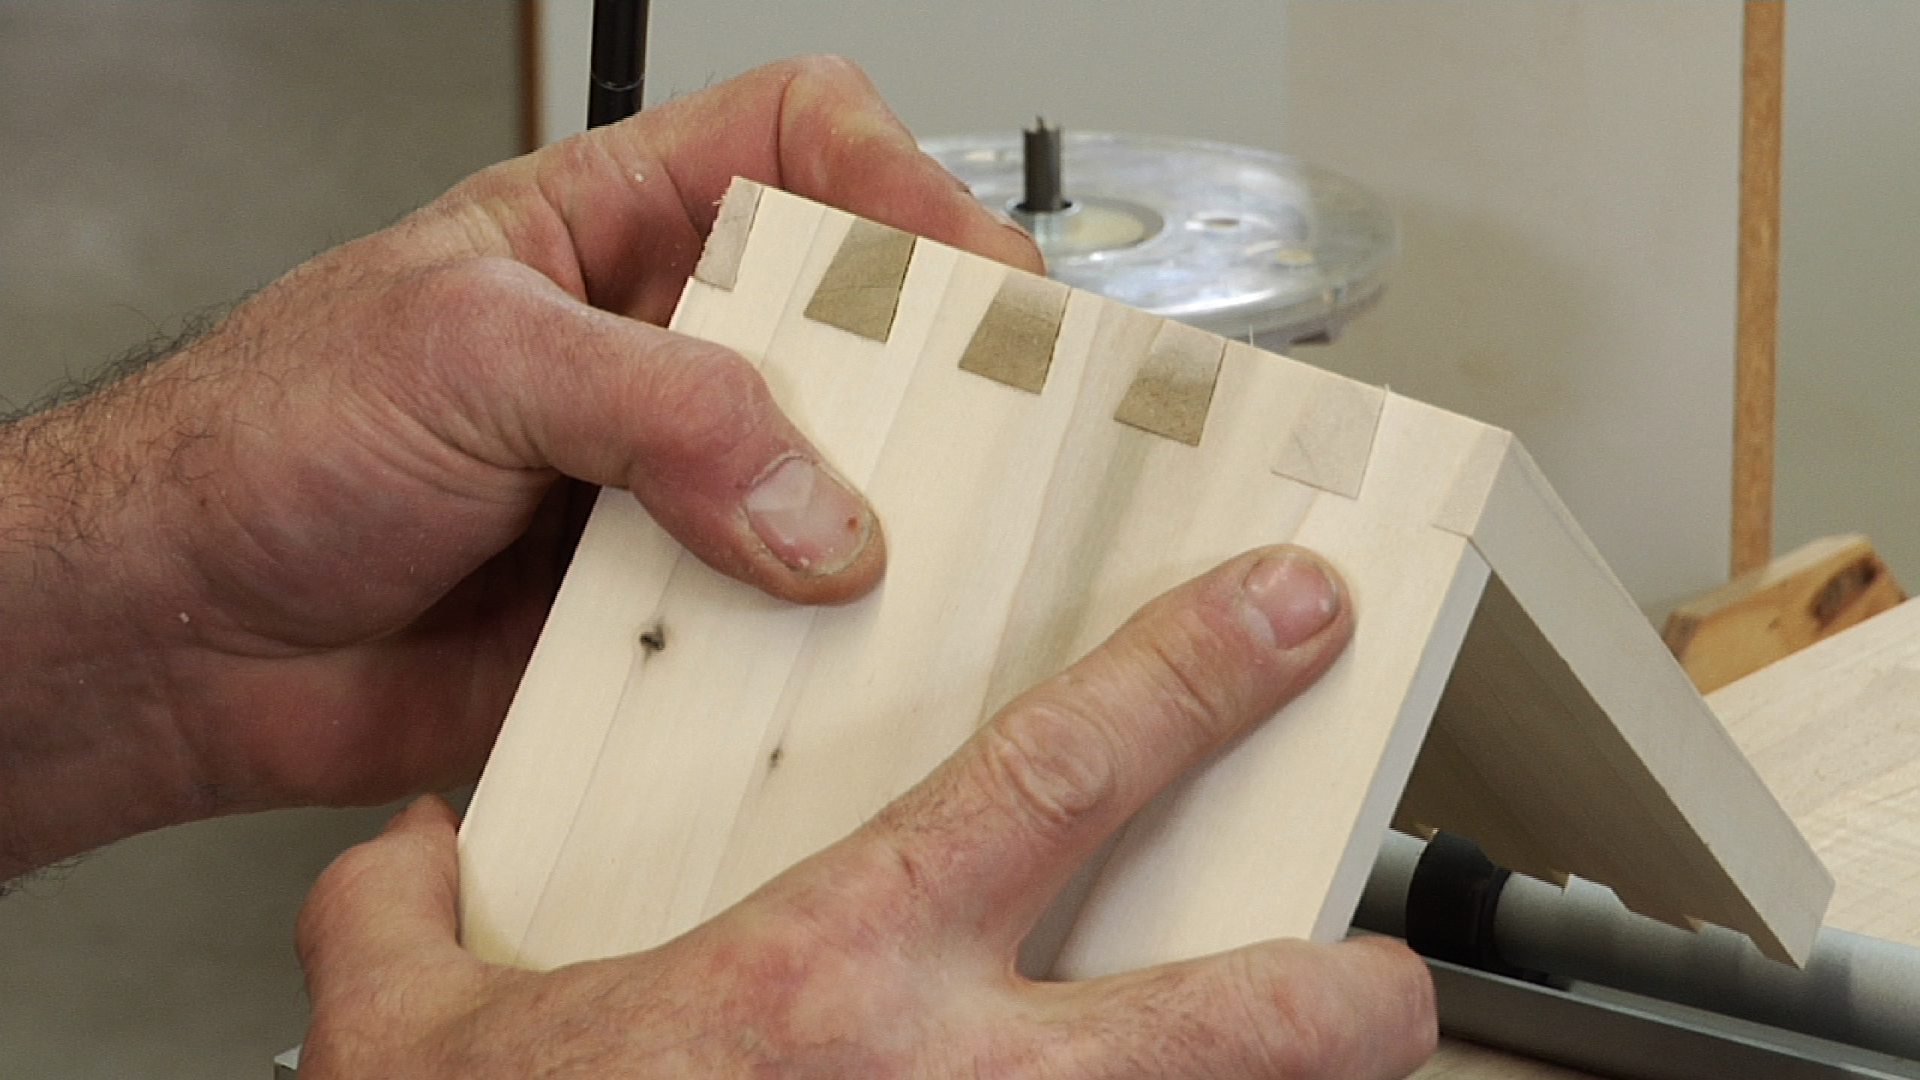 Porter Cable Dovetail Jig: Cutting Pins and Sockets product featured image thumbnail.